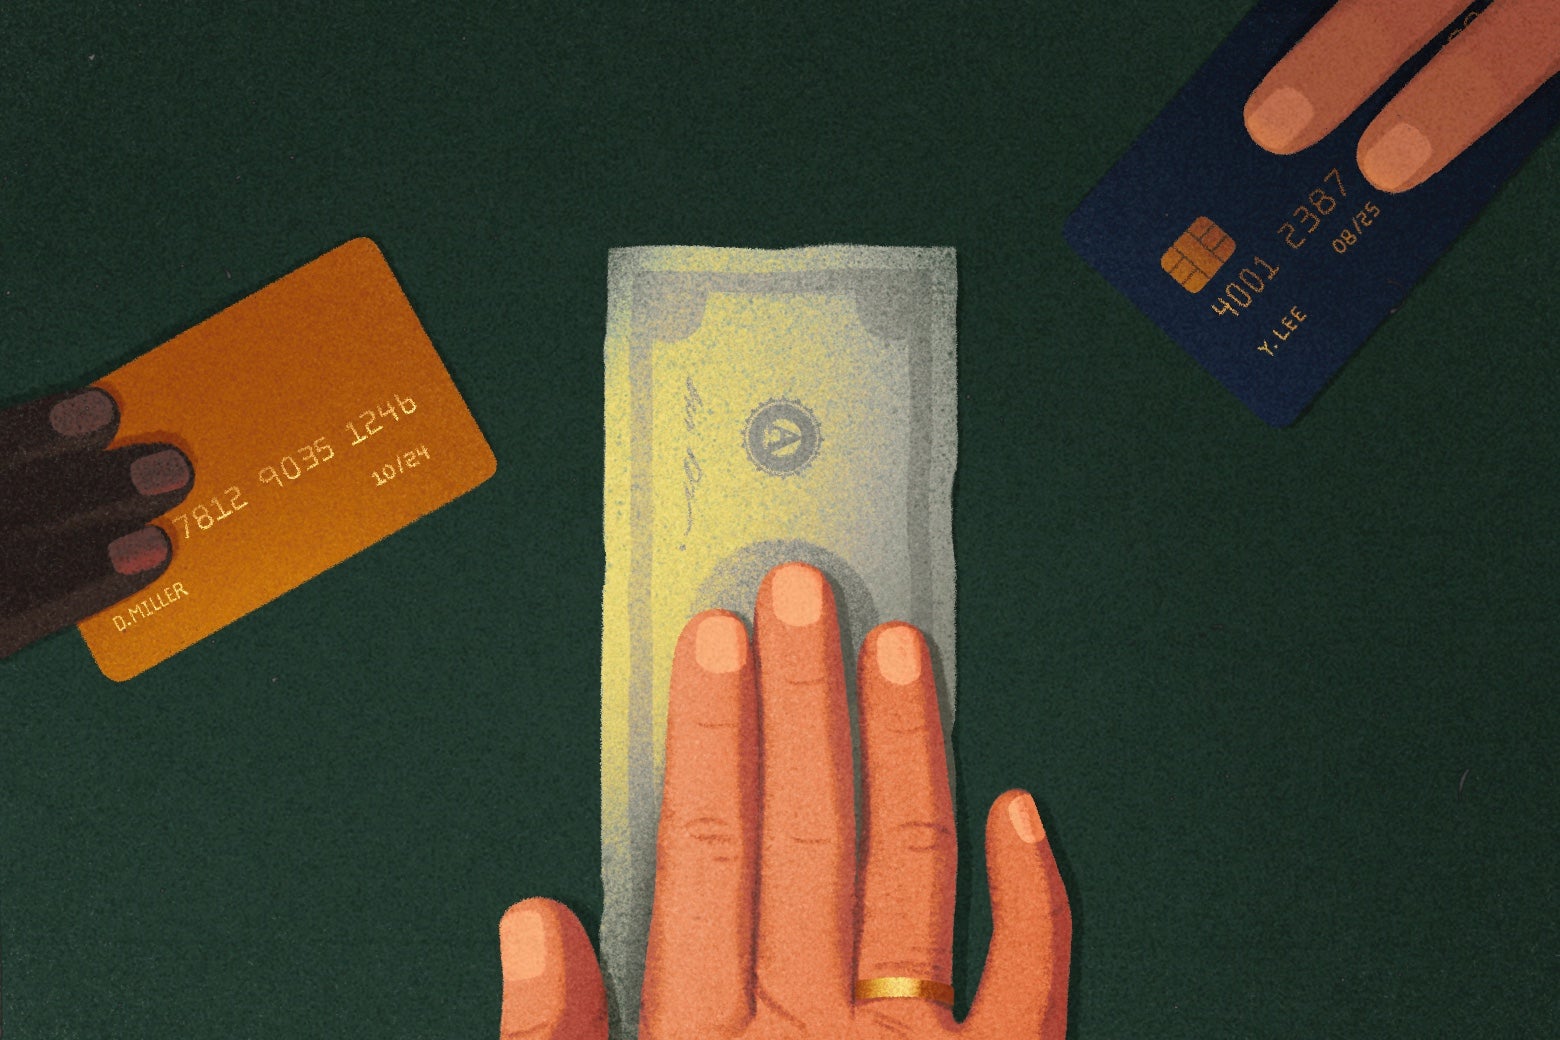 Two illustrated hands place a credit card on a table; another hand sets down cash.